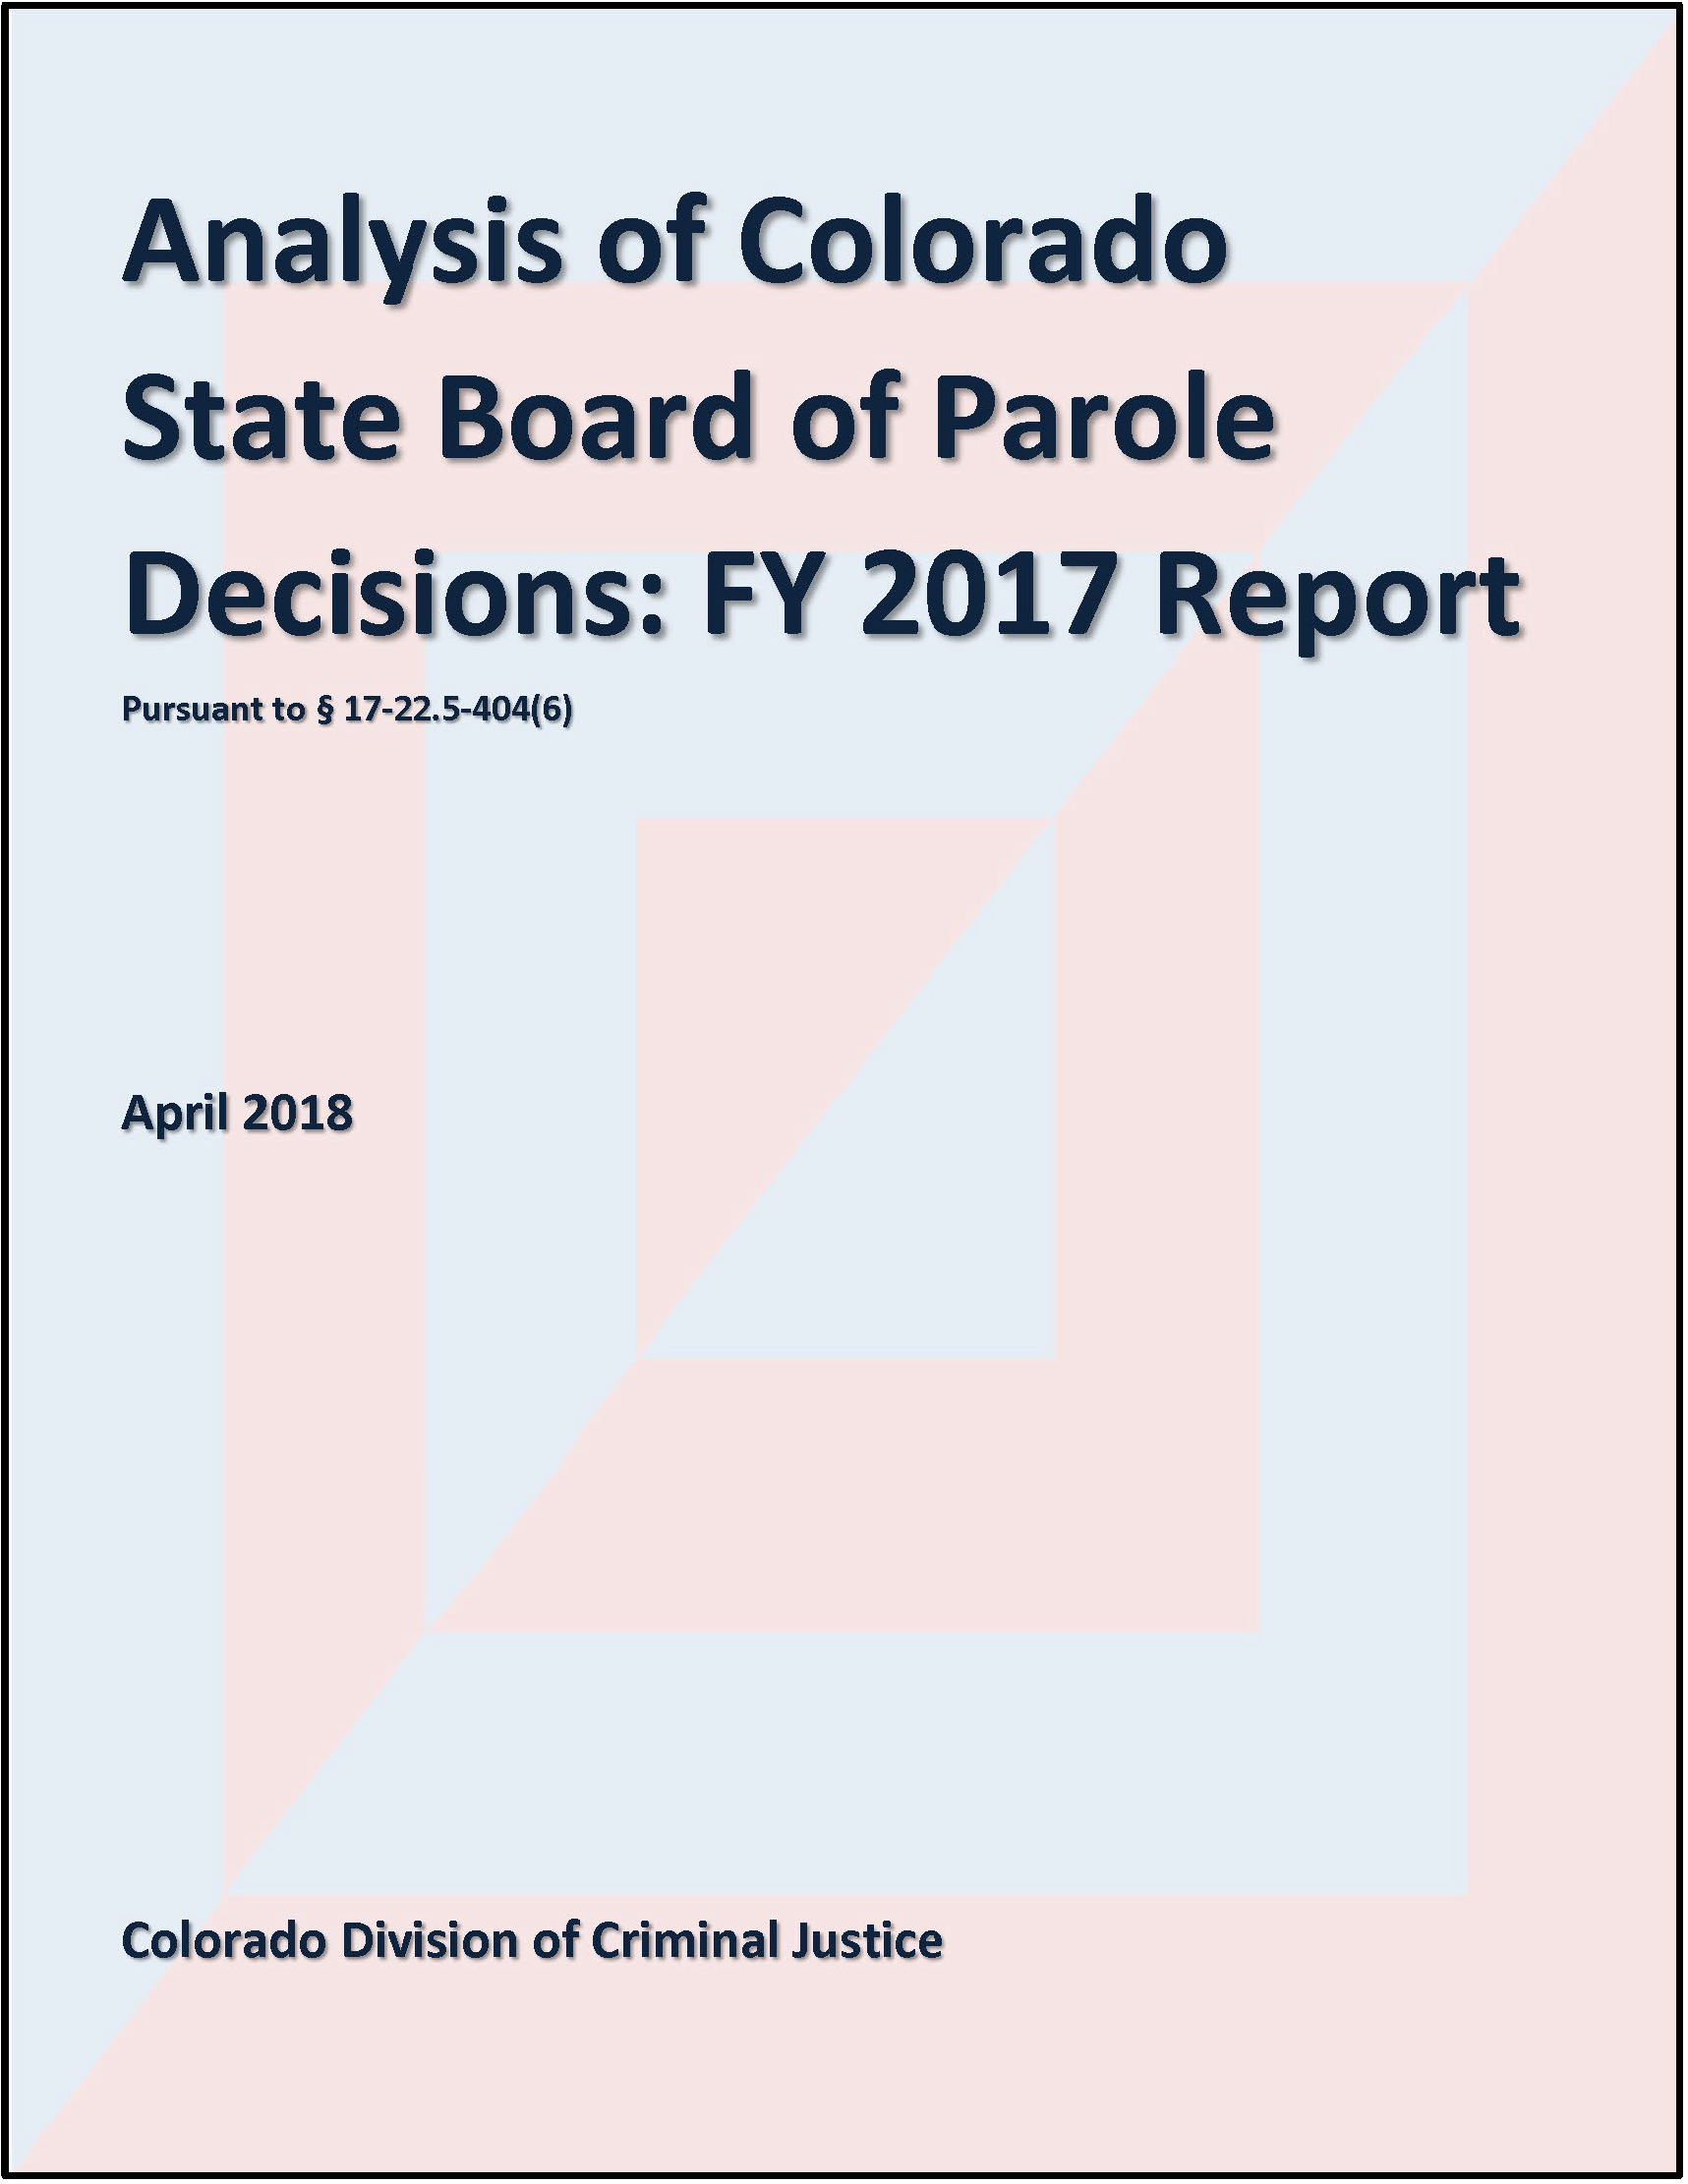 Analysis of Colorado State Board of Parole Decisions: FY 2017 Report (April 2018)